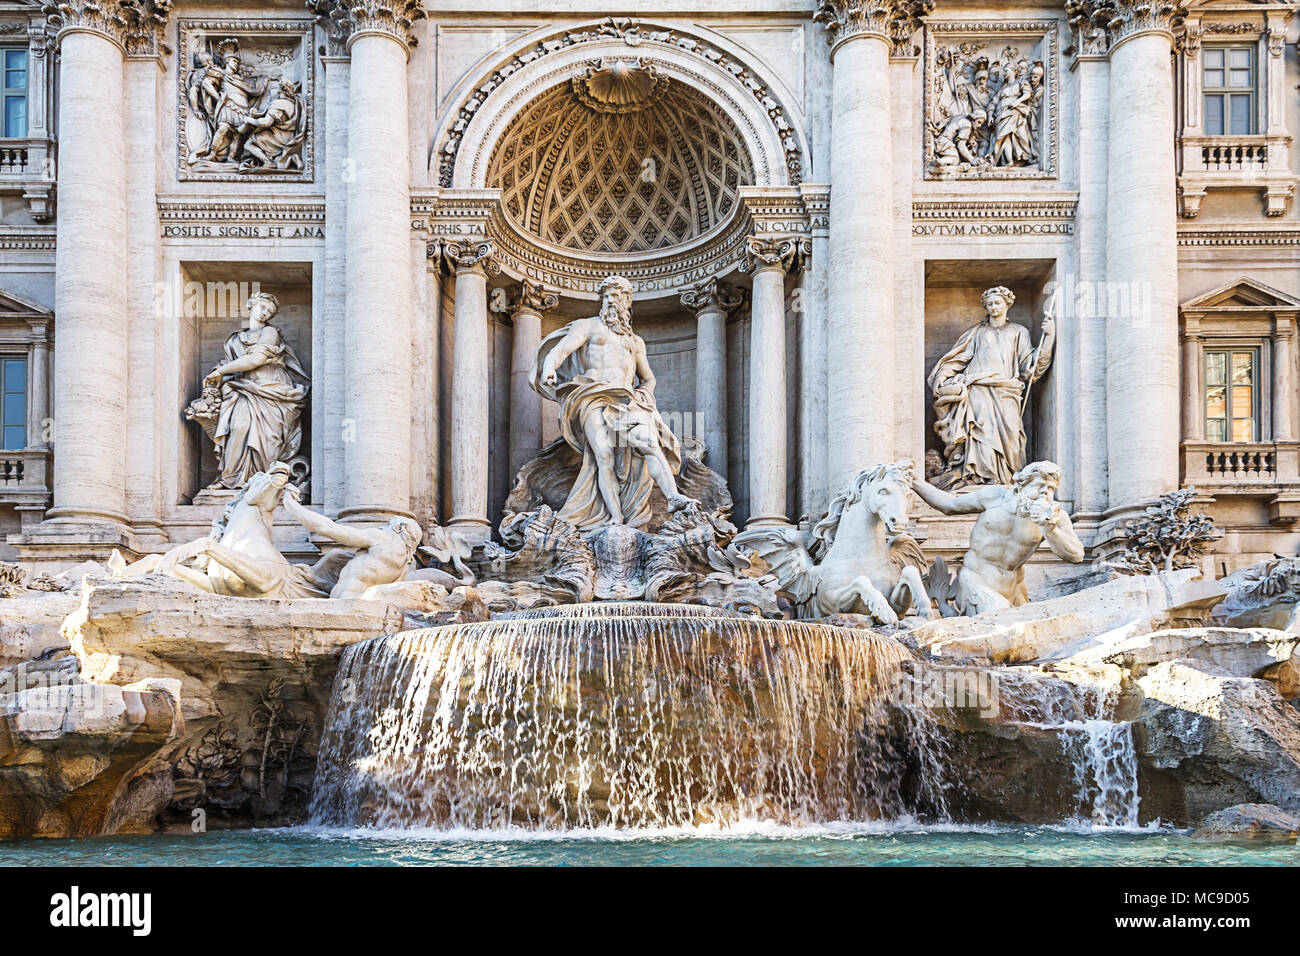 Trevi Fountain in Rome, Italy. Famous landmark fountain di Trevi close up front view of facade and statues.Rome baroque architecture and landmark. Stock Photo